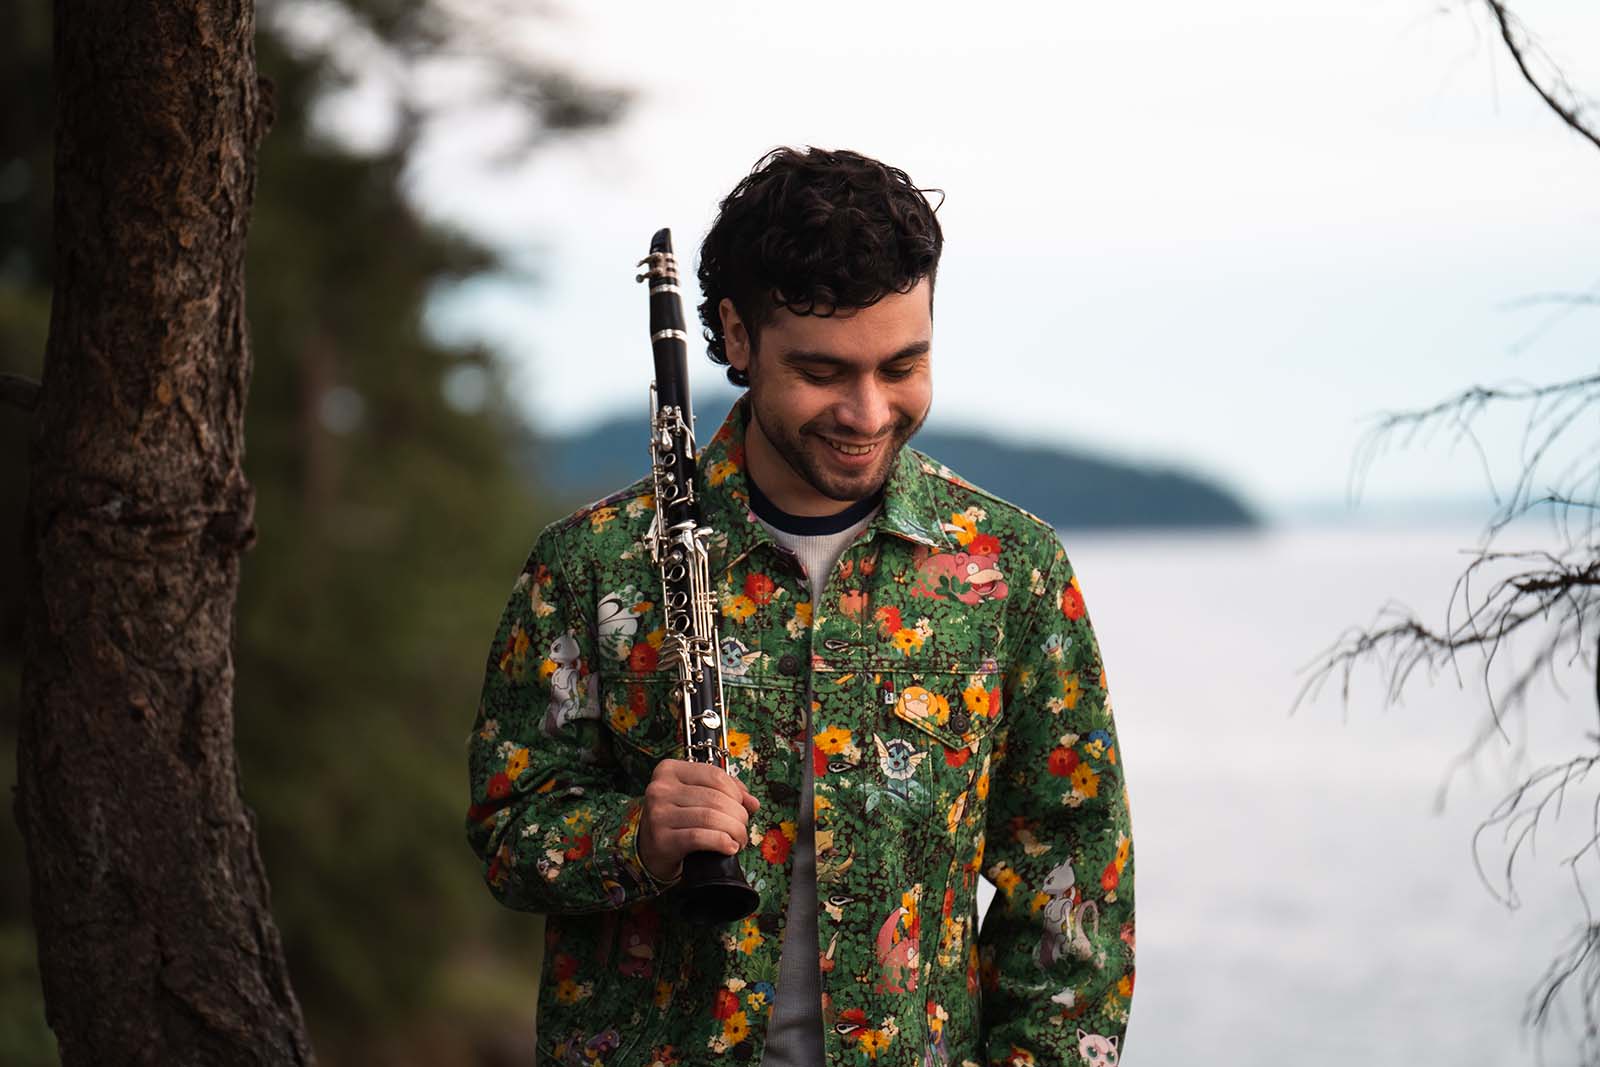 curly-haired person in a floral shirt with a clarinet over their shoulder.  A lake is behind.